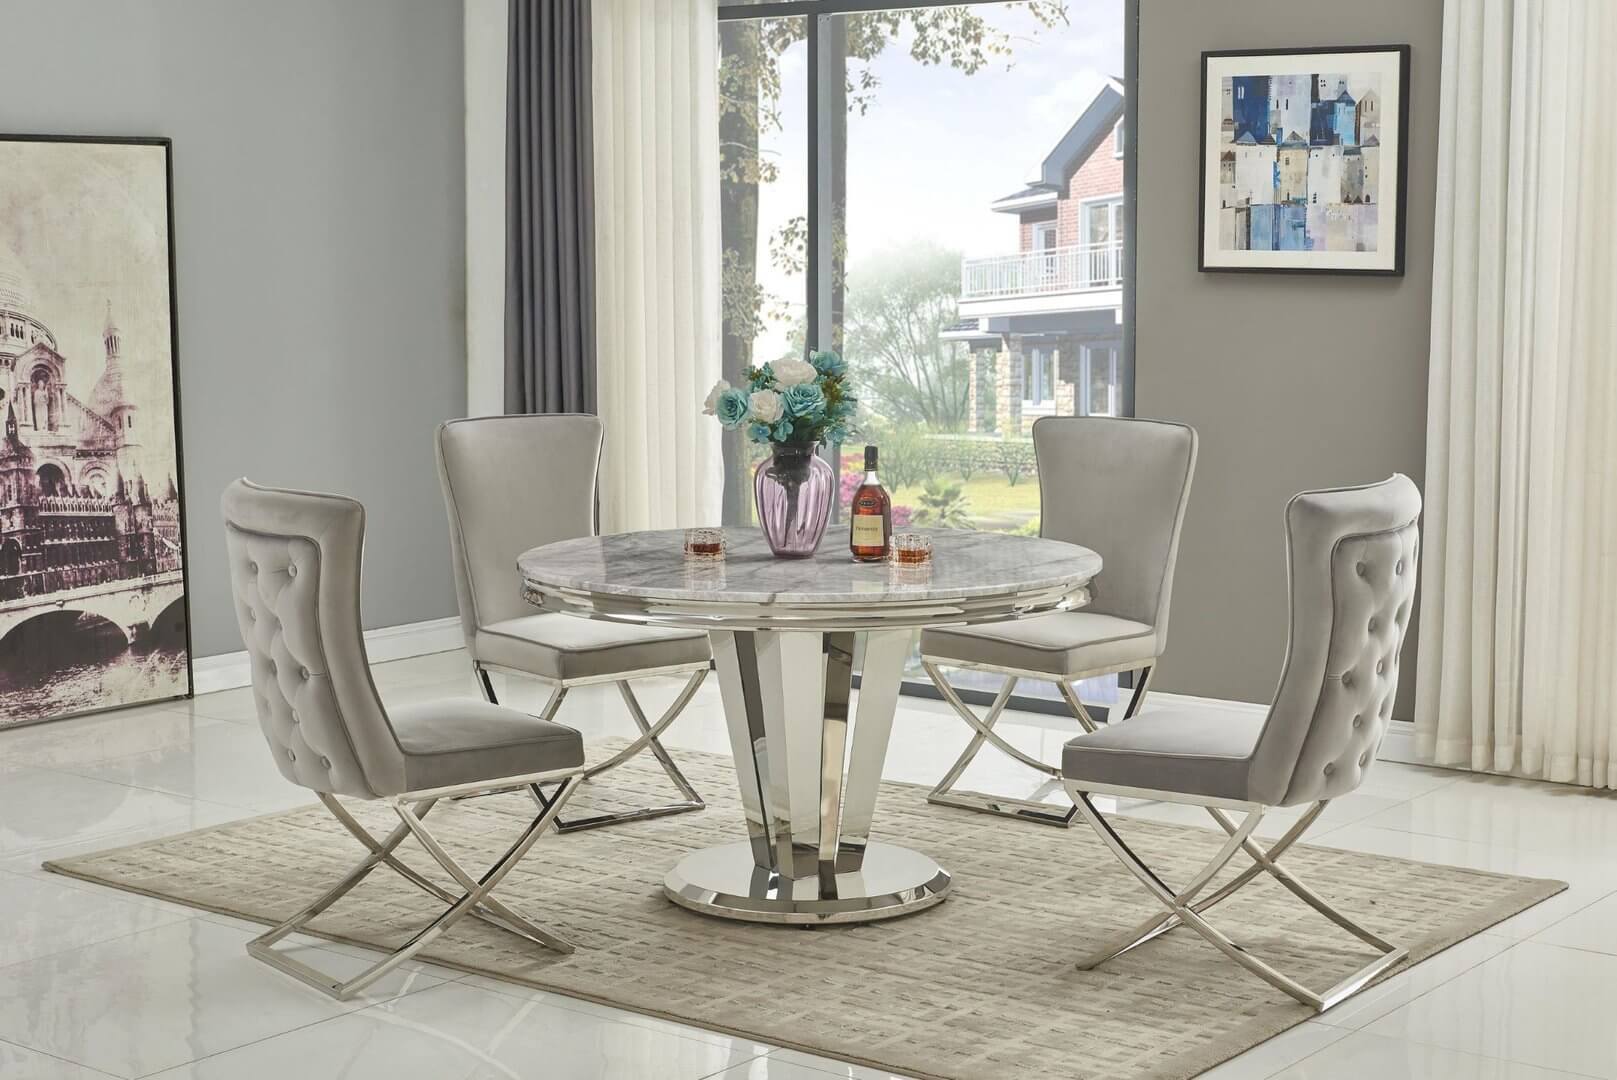 Marble dining table and chairs